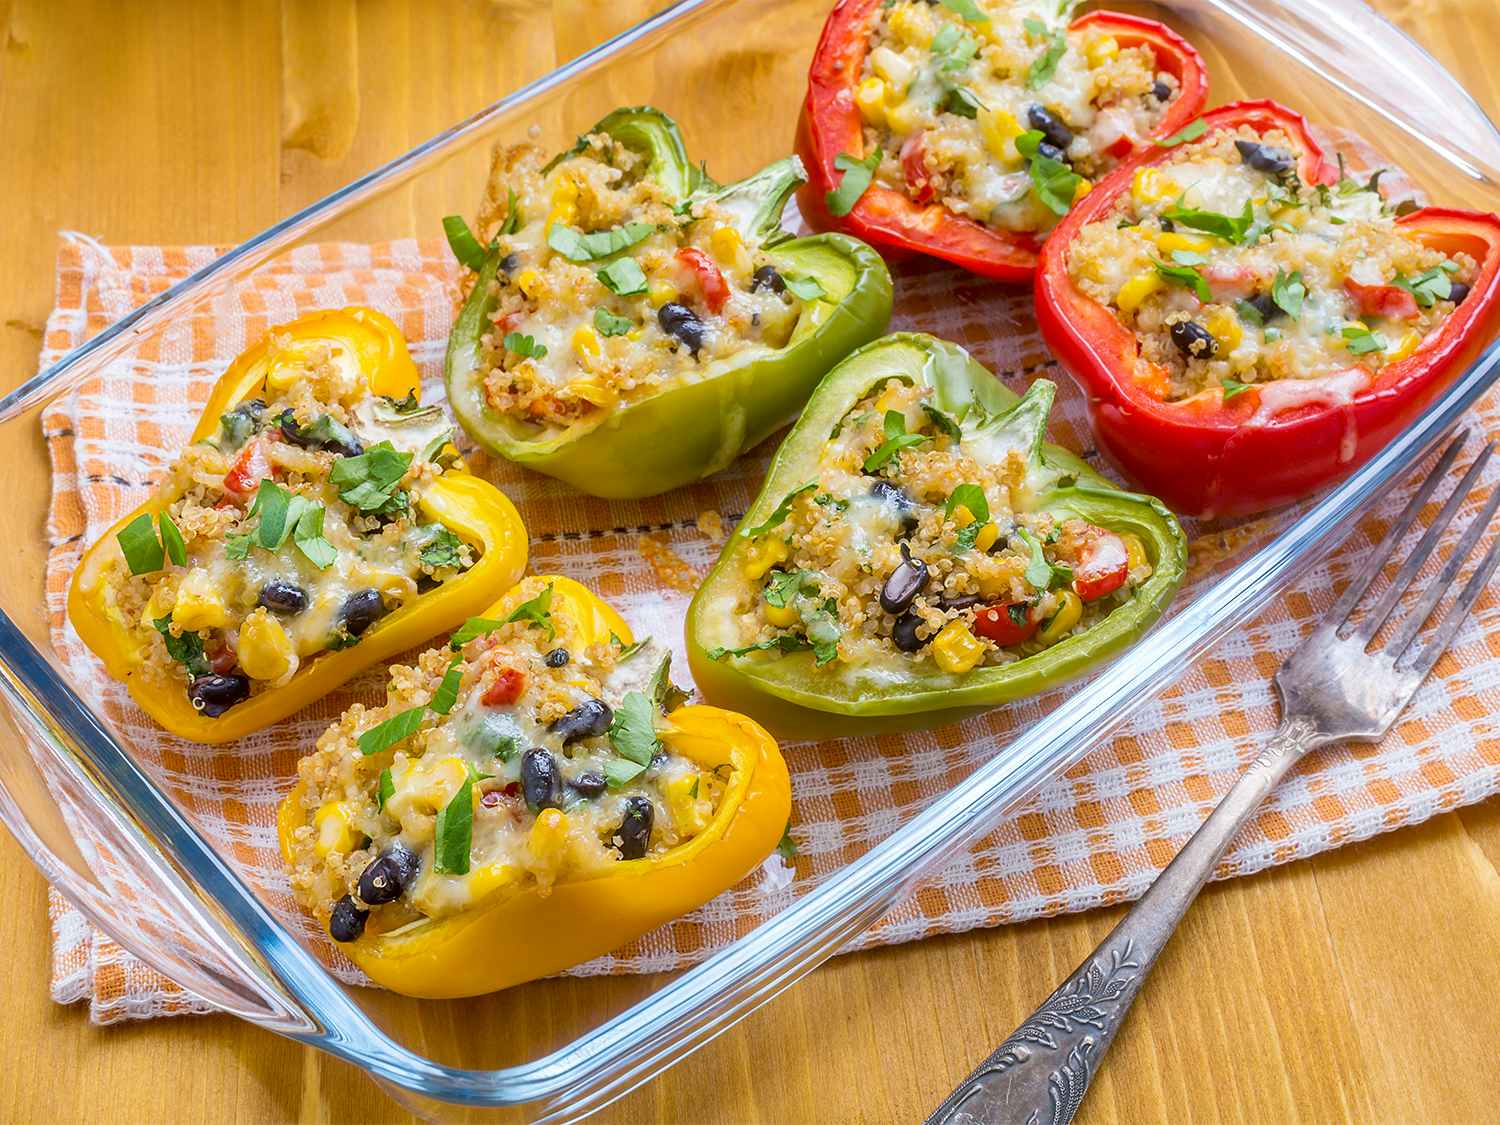 Baked Mexican Quinoa Stuffed Peppers recipe